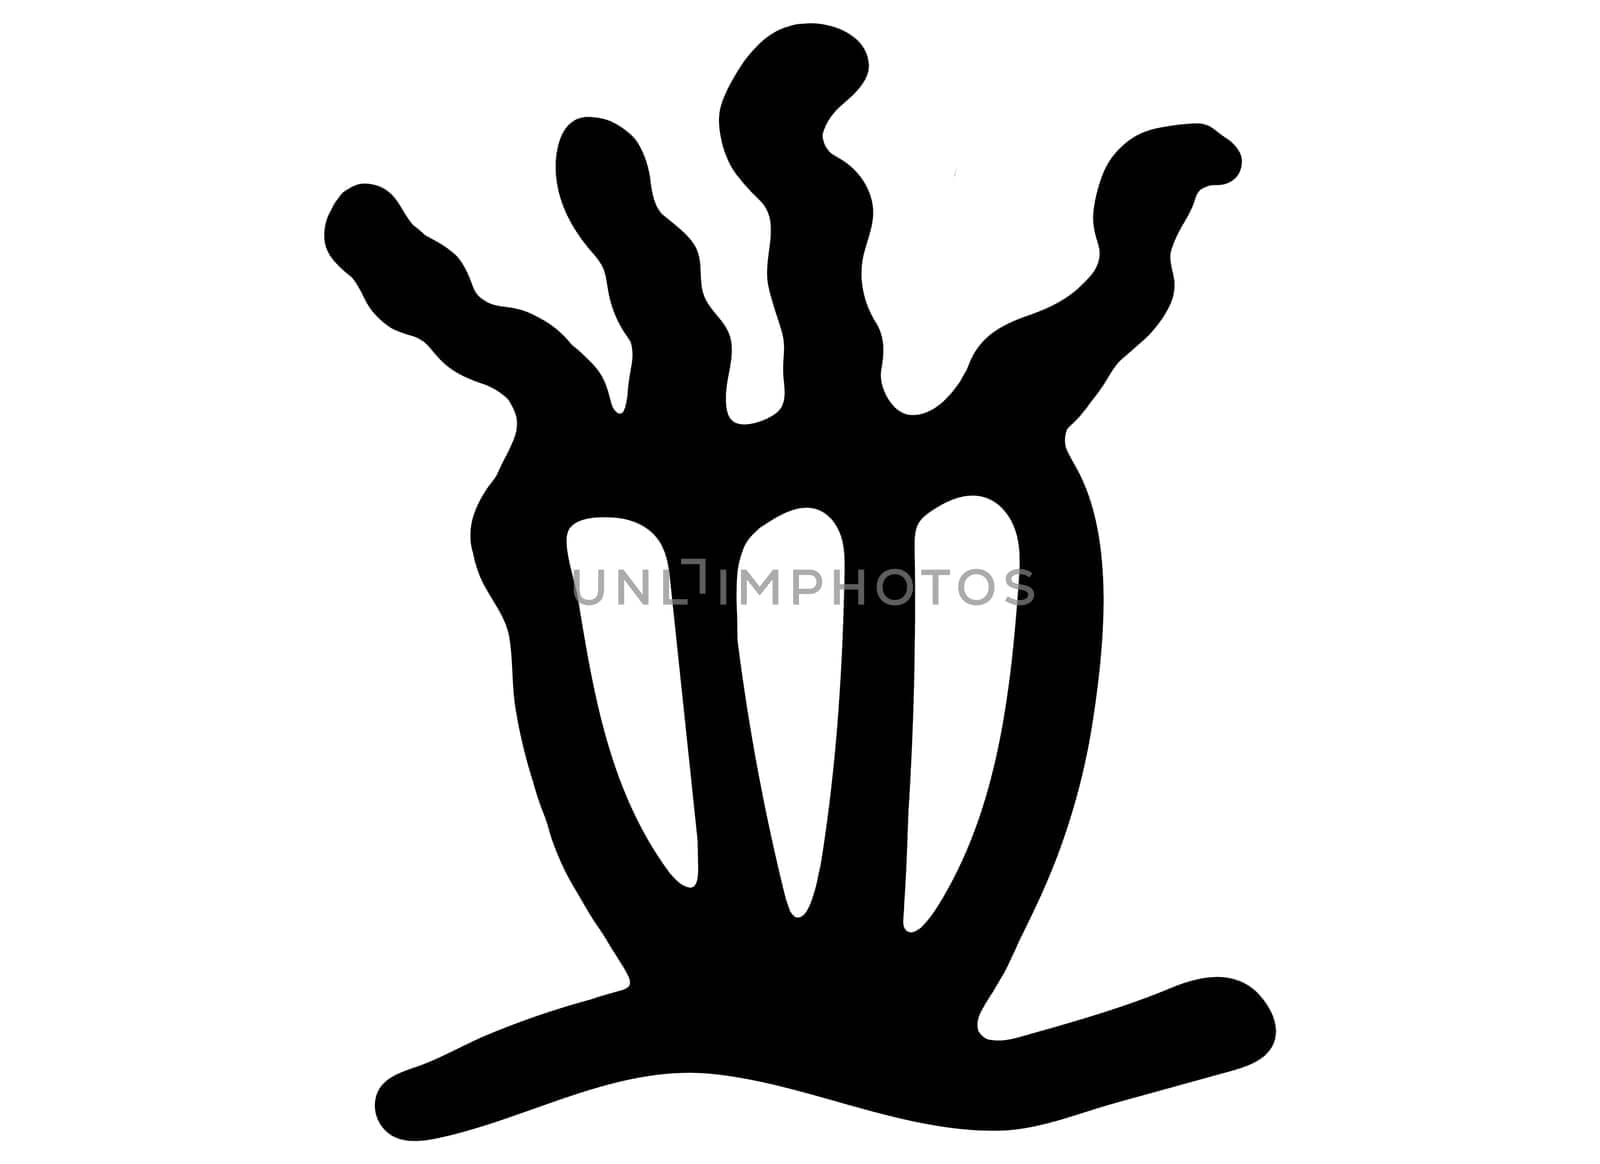 Black and White Actinia Illustration Isolated on White Background. Clipart Ocean Plant Illustration.